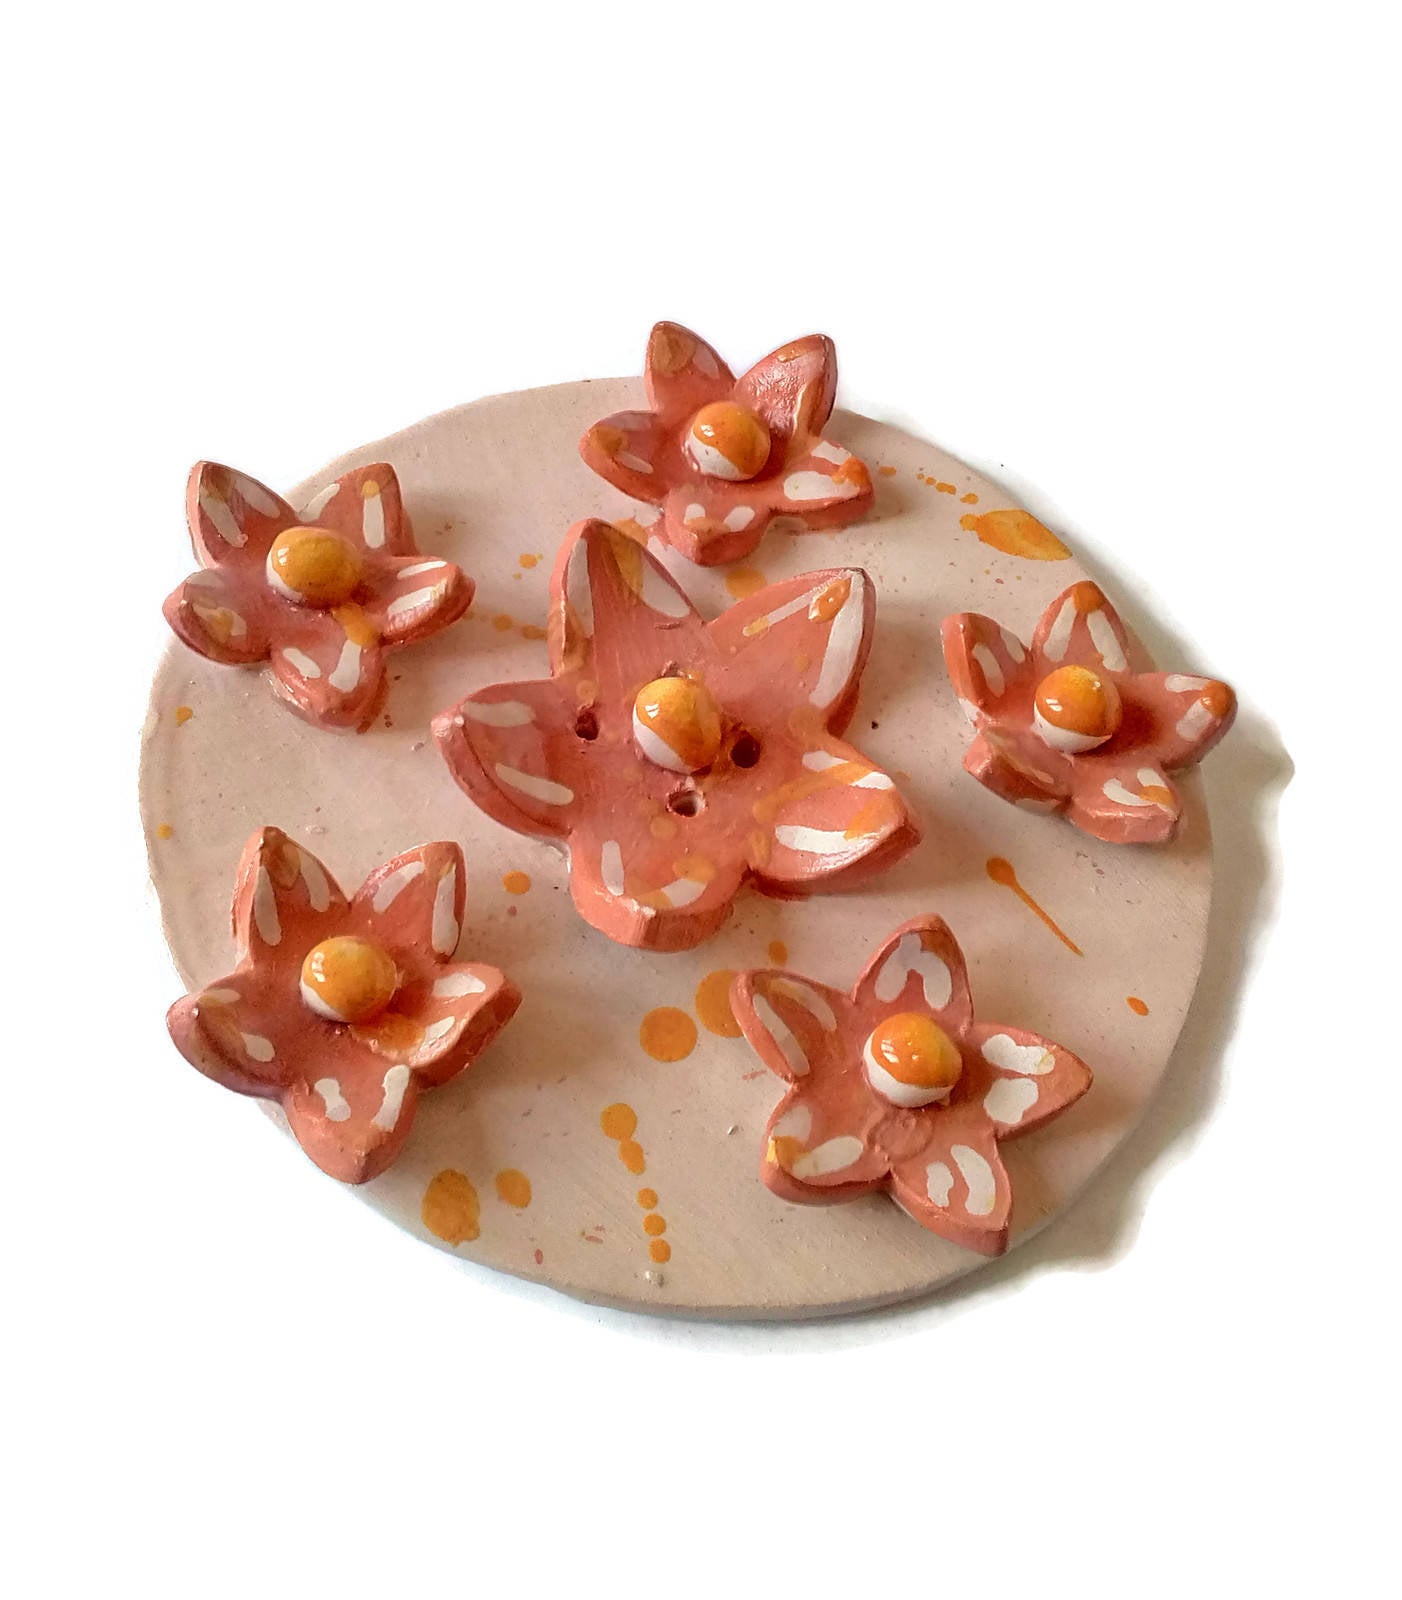 HANDMADE CERAMIC BUTTON Wall Decor For Craft Or Sewing Room Decor, Best Gifts For Her On Mothers Day - Ceramica Ana Rafael